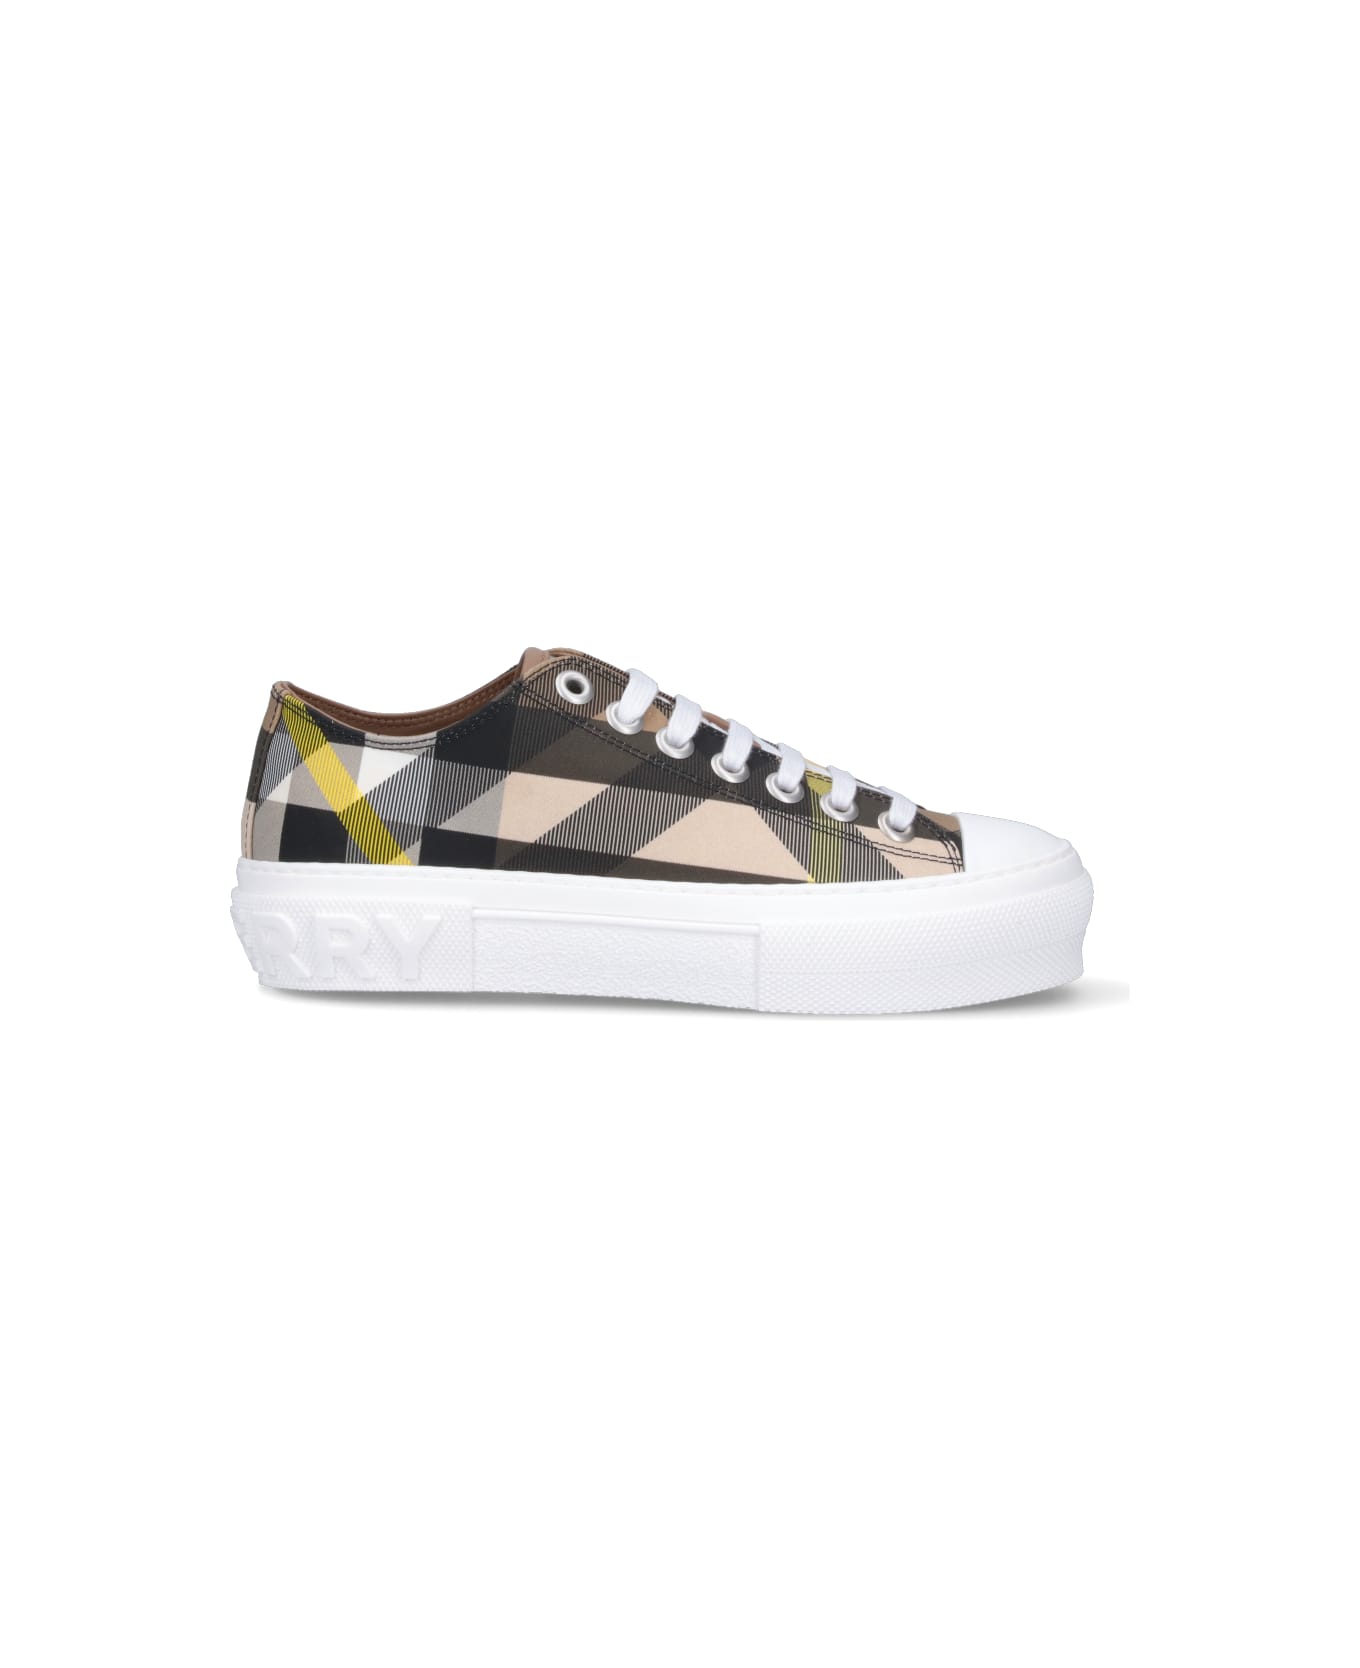 Burberry Cotton Sneakers - Brown スニーカー